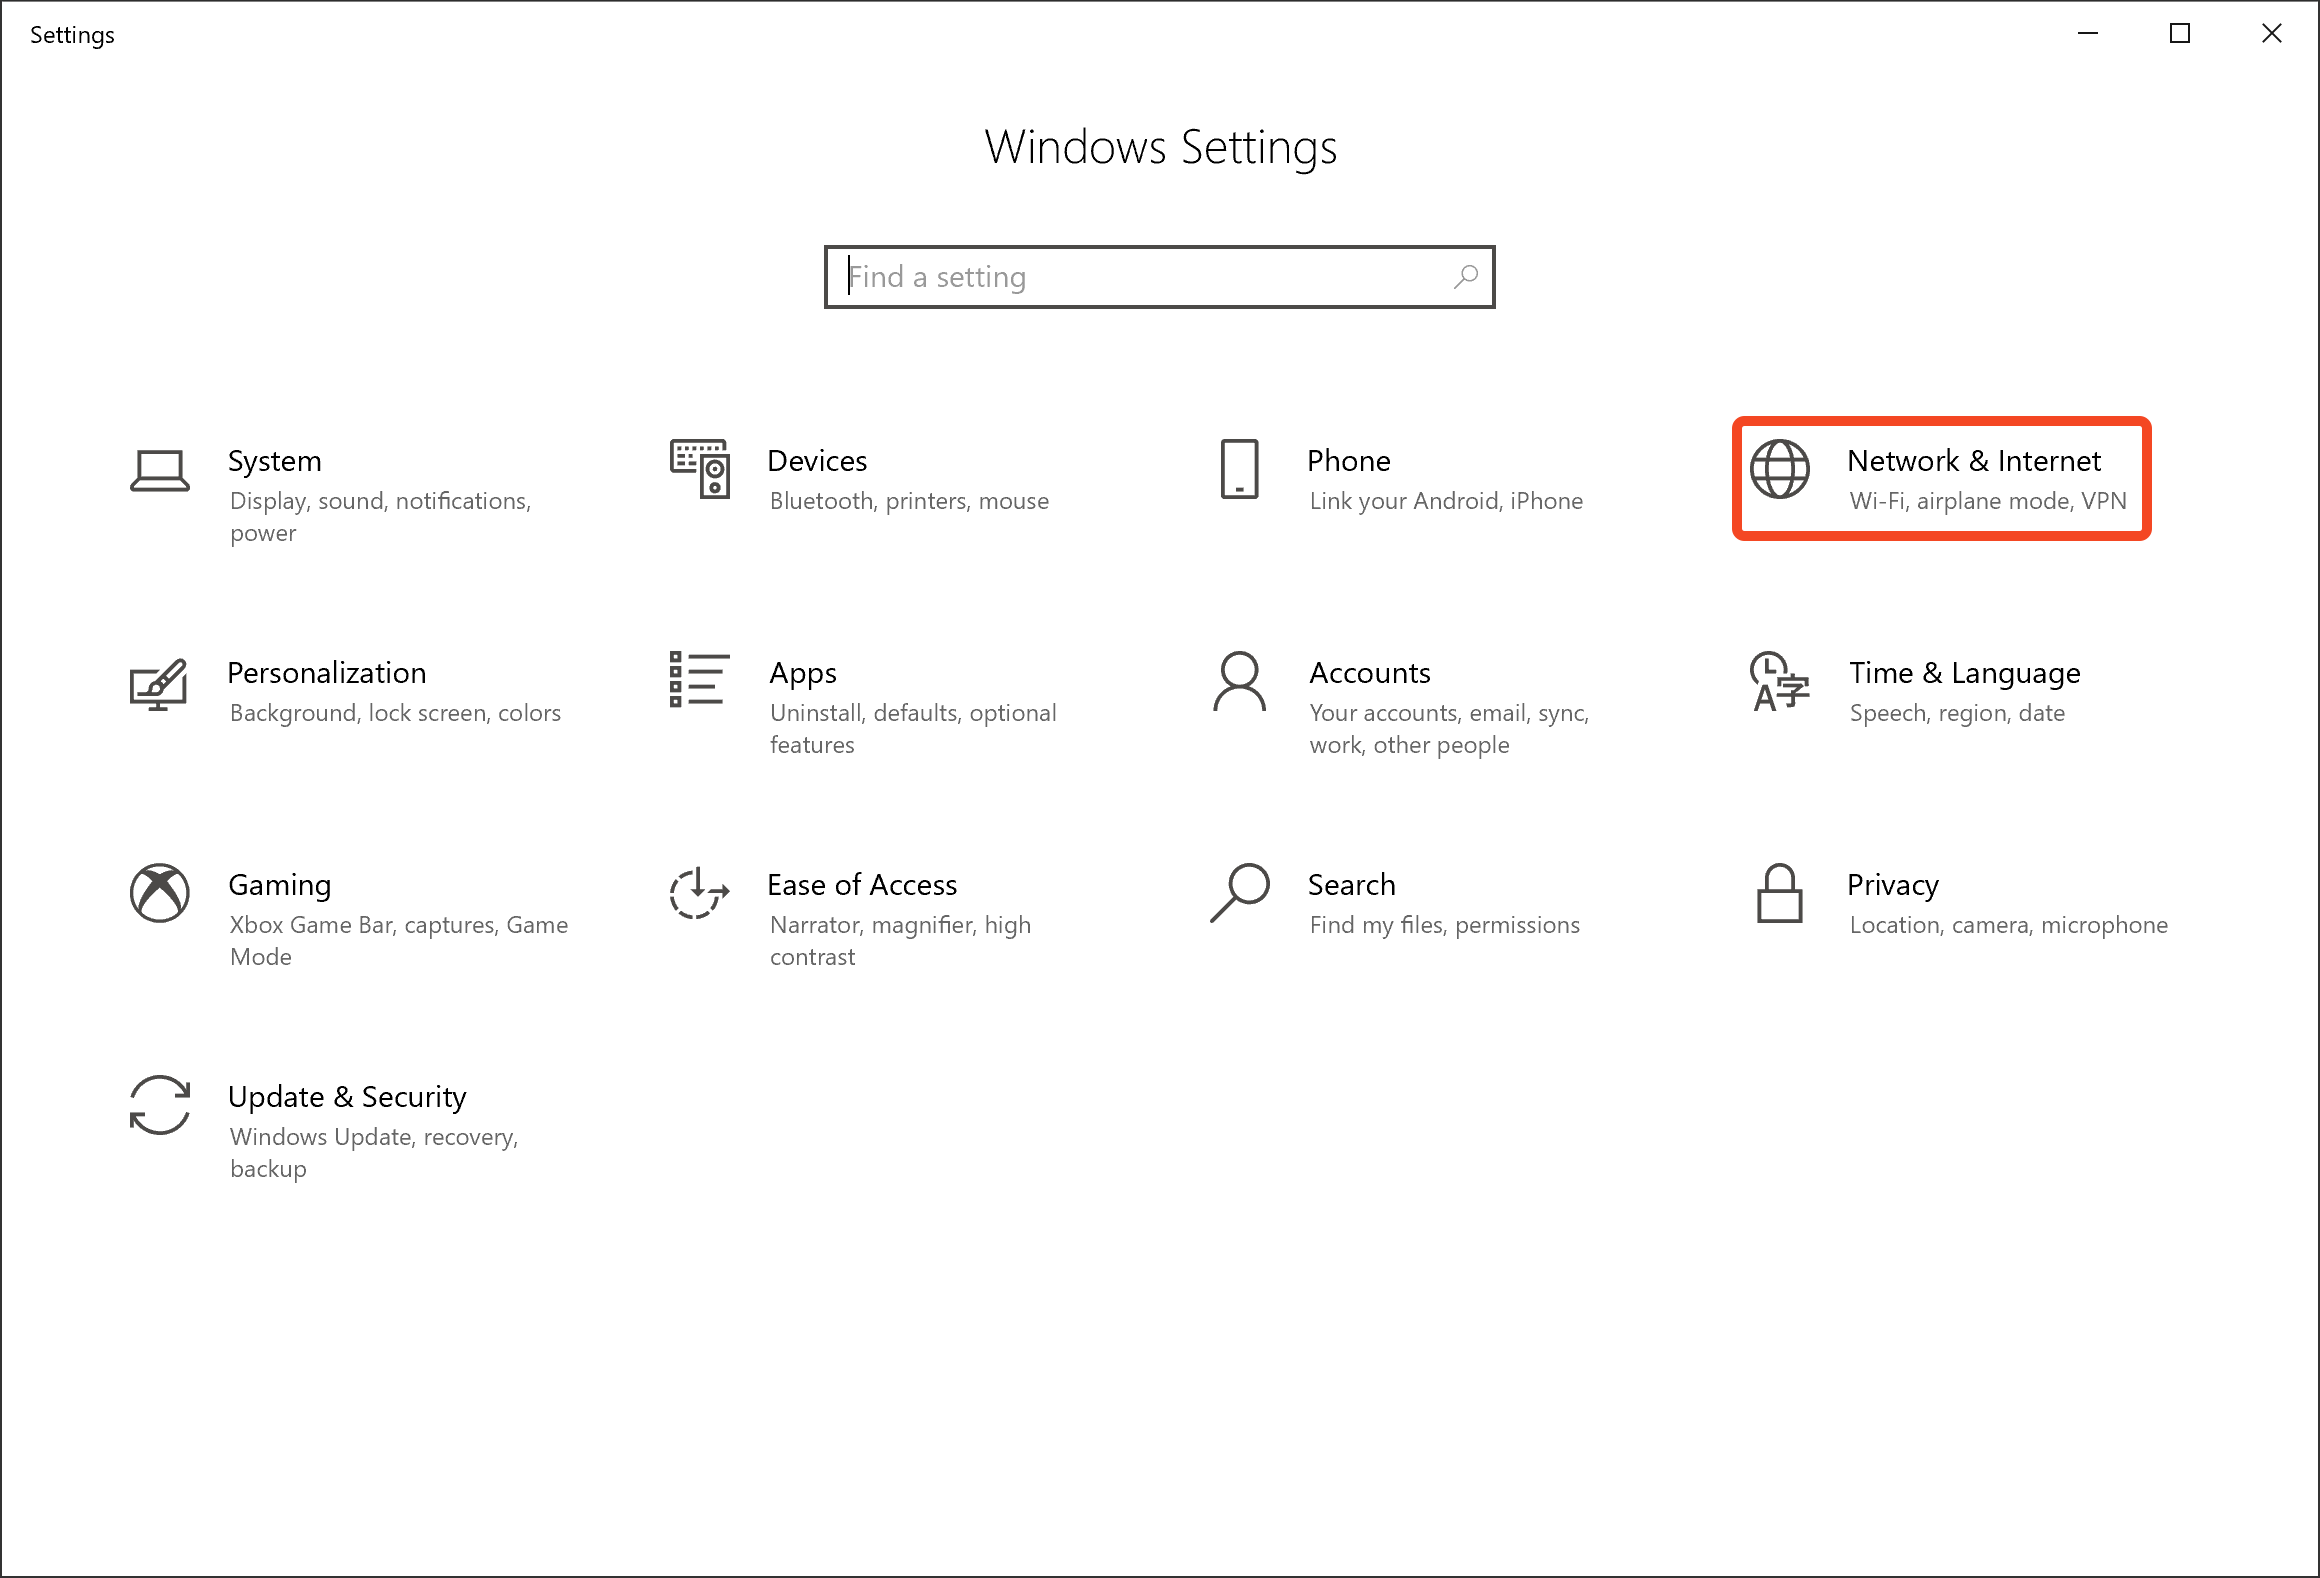 Windows Settings with "Network & Internet" button highlighted